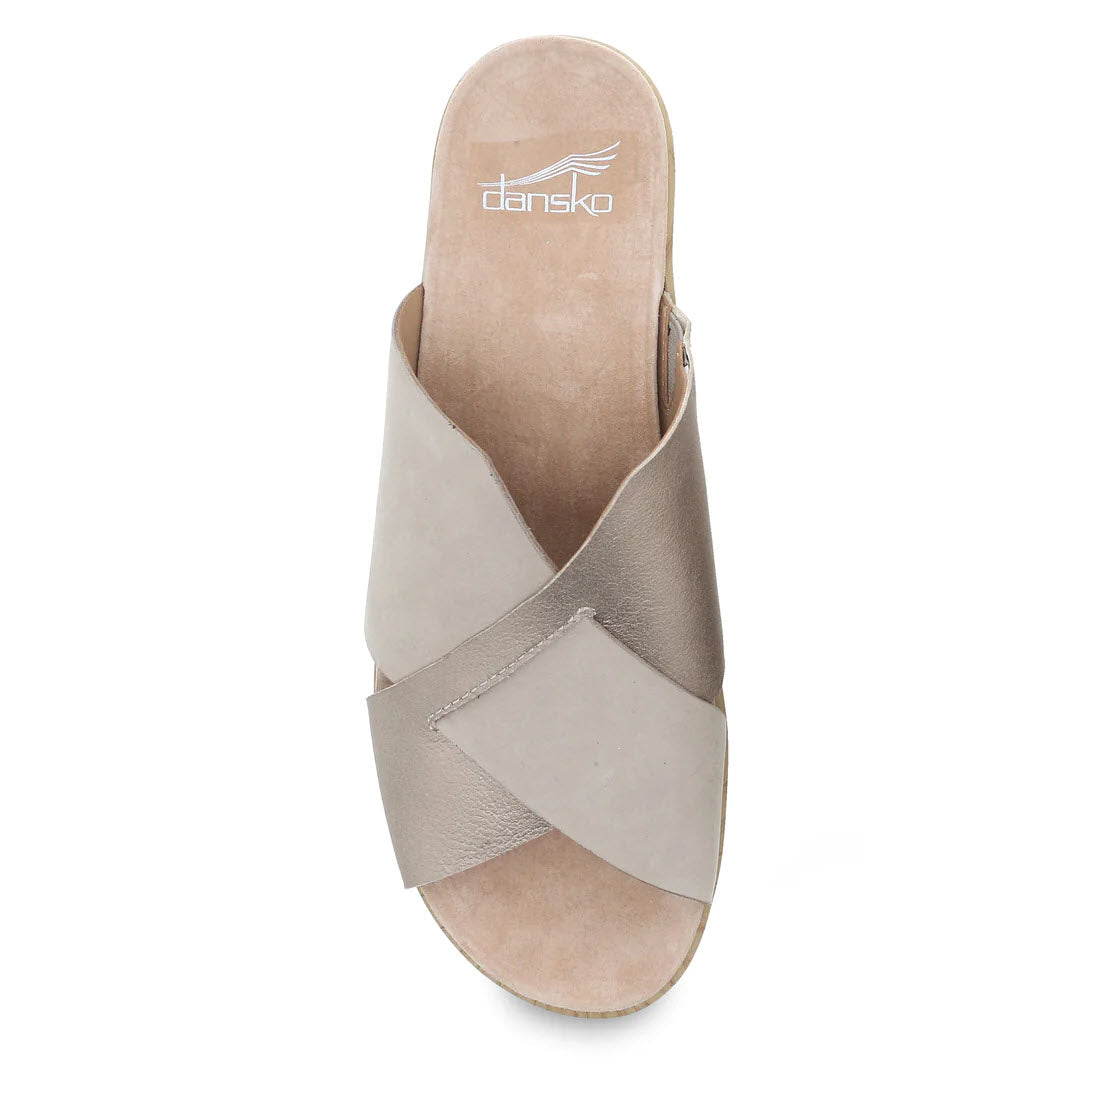 A top view of a Dansko Miri Sand Multi women&#39;s slide sandal with crisscross metallic and nude leather uppers on a white background.